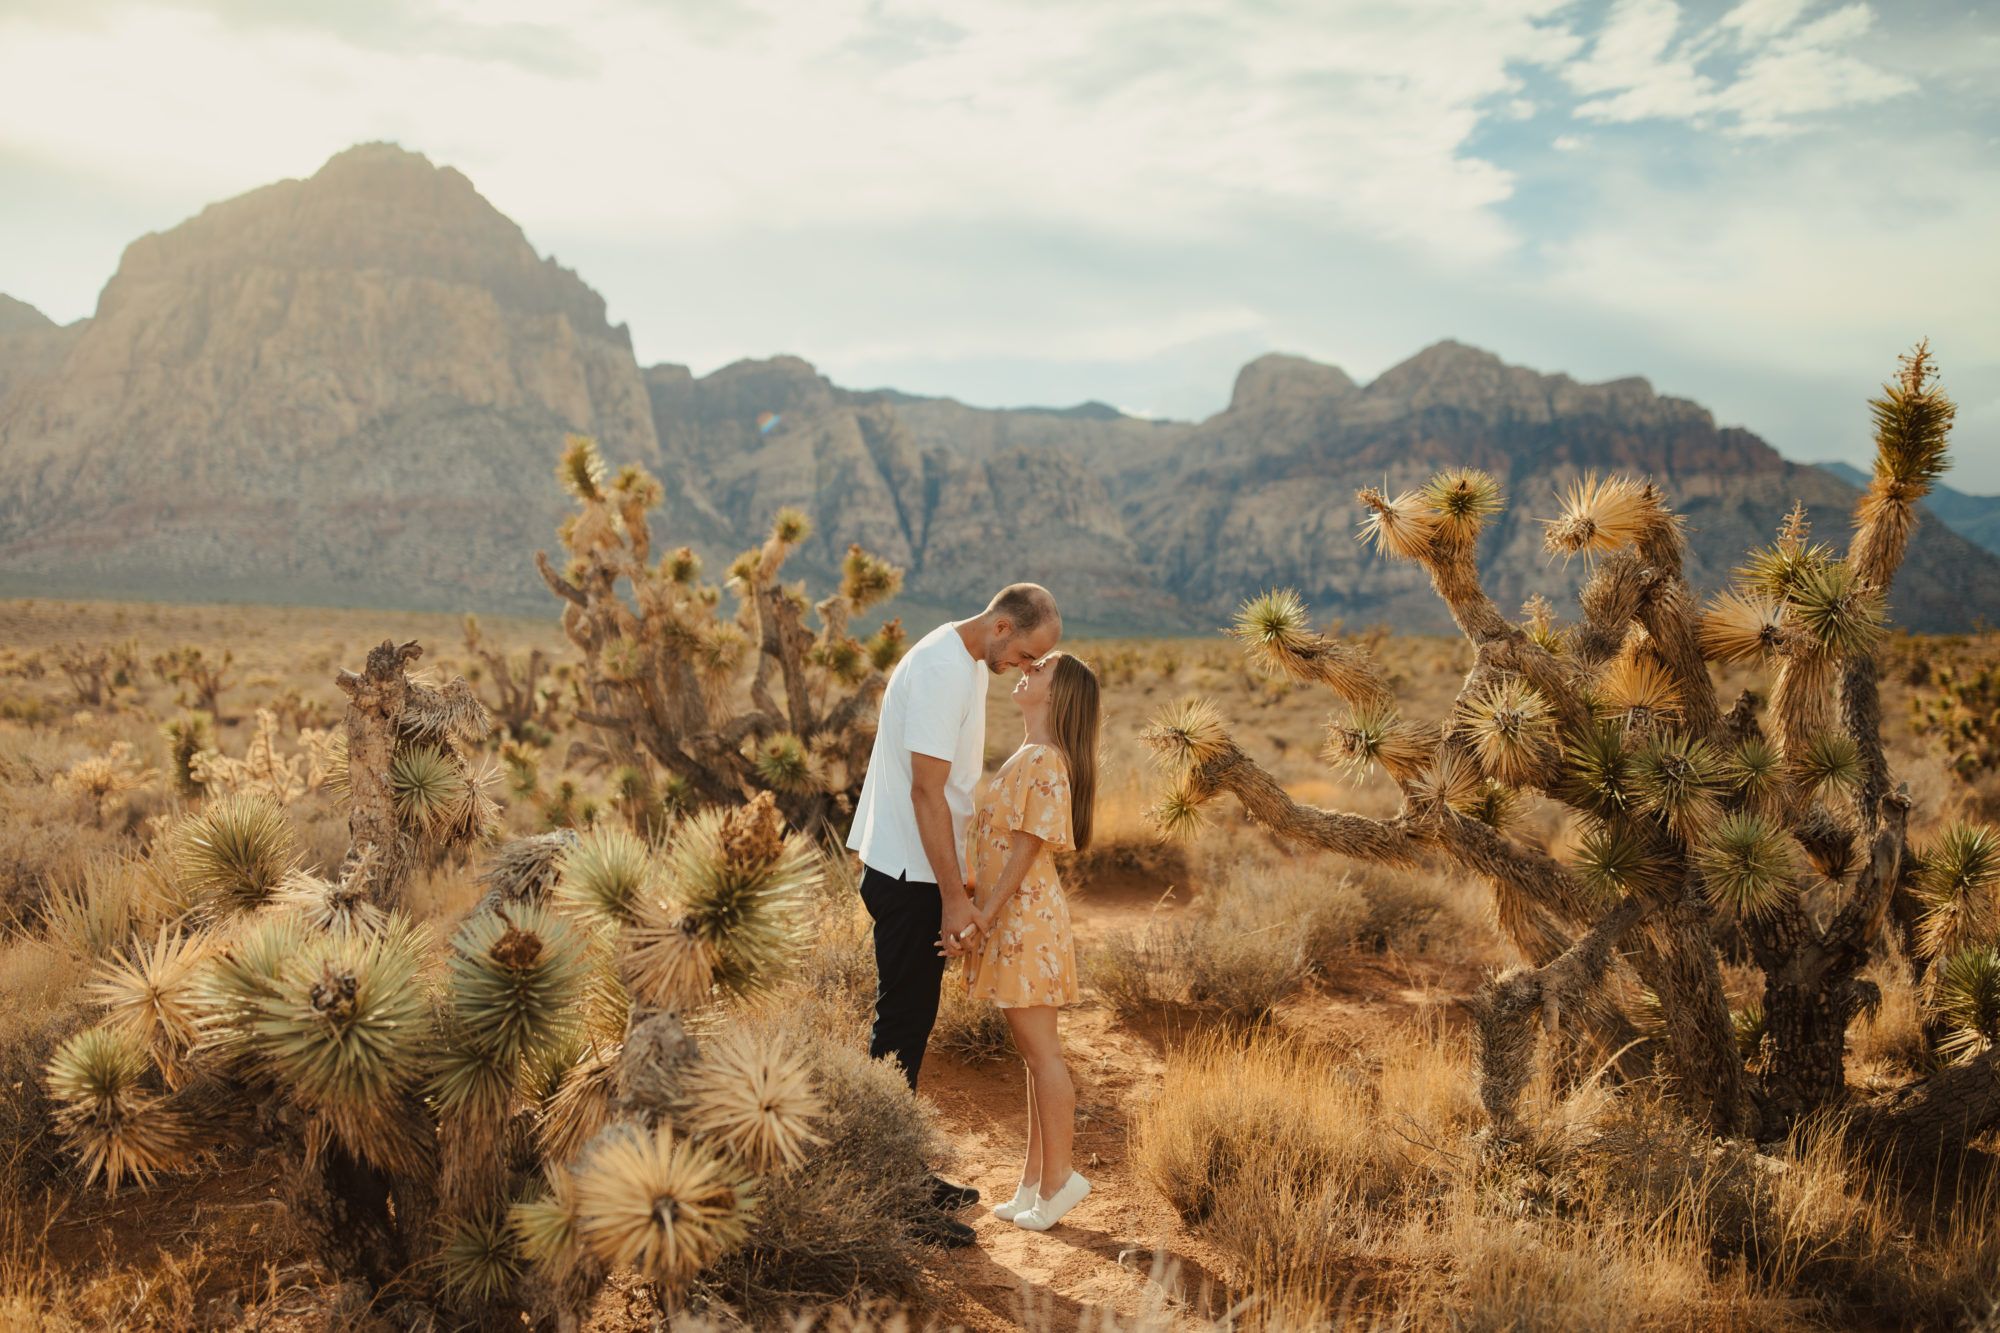 couple holding hands with mountains in the background in the desert with trees 